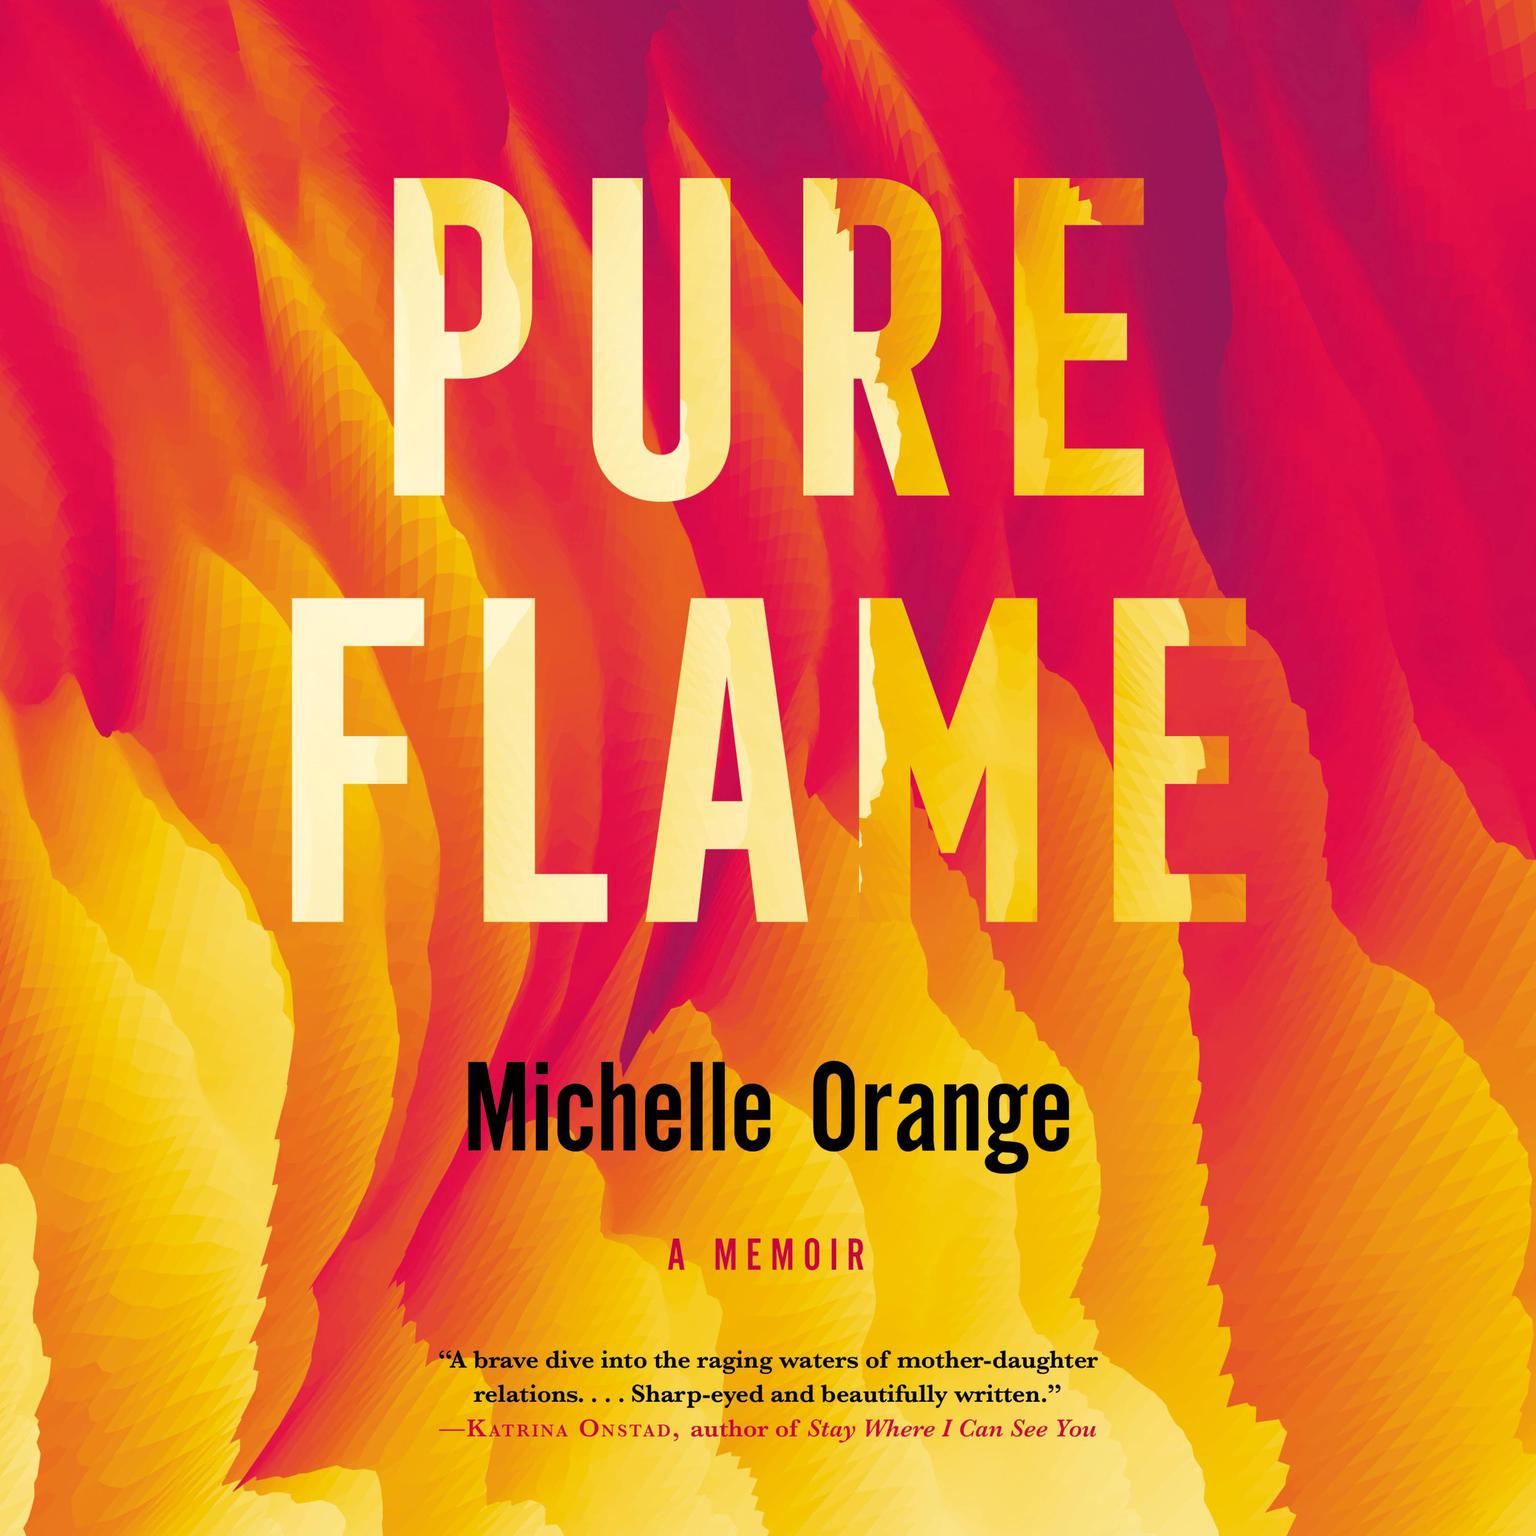 Pure Flame Audiobook, by Michelle Orange